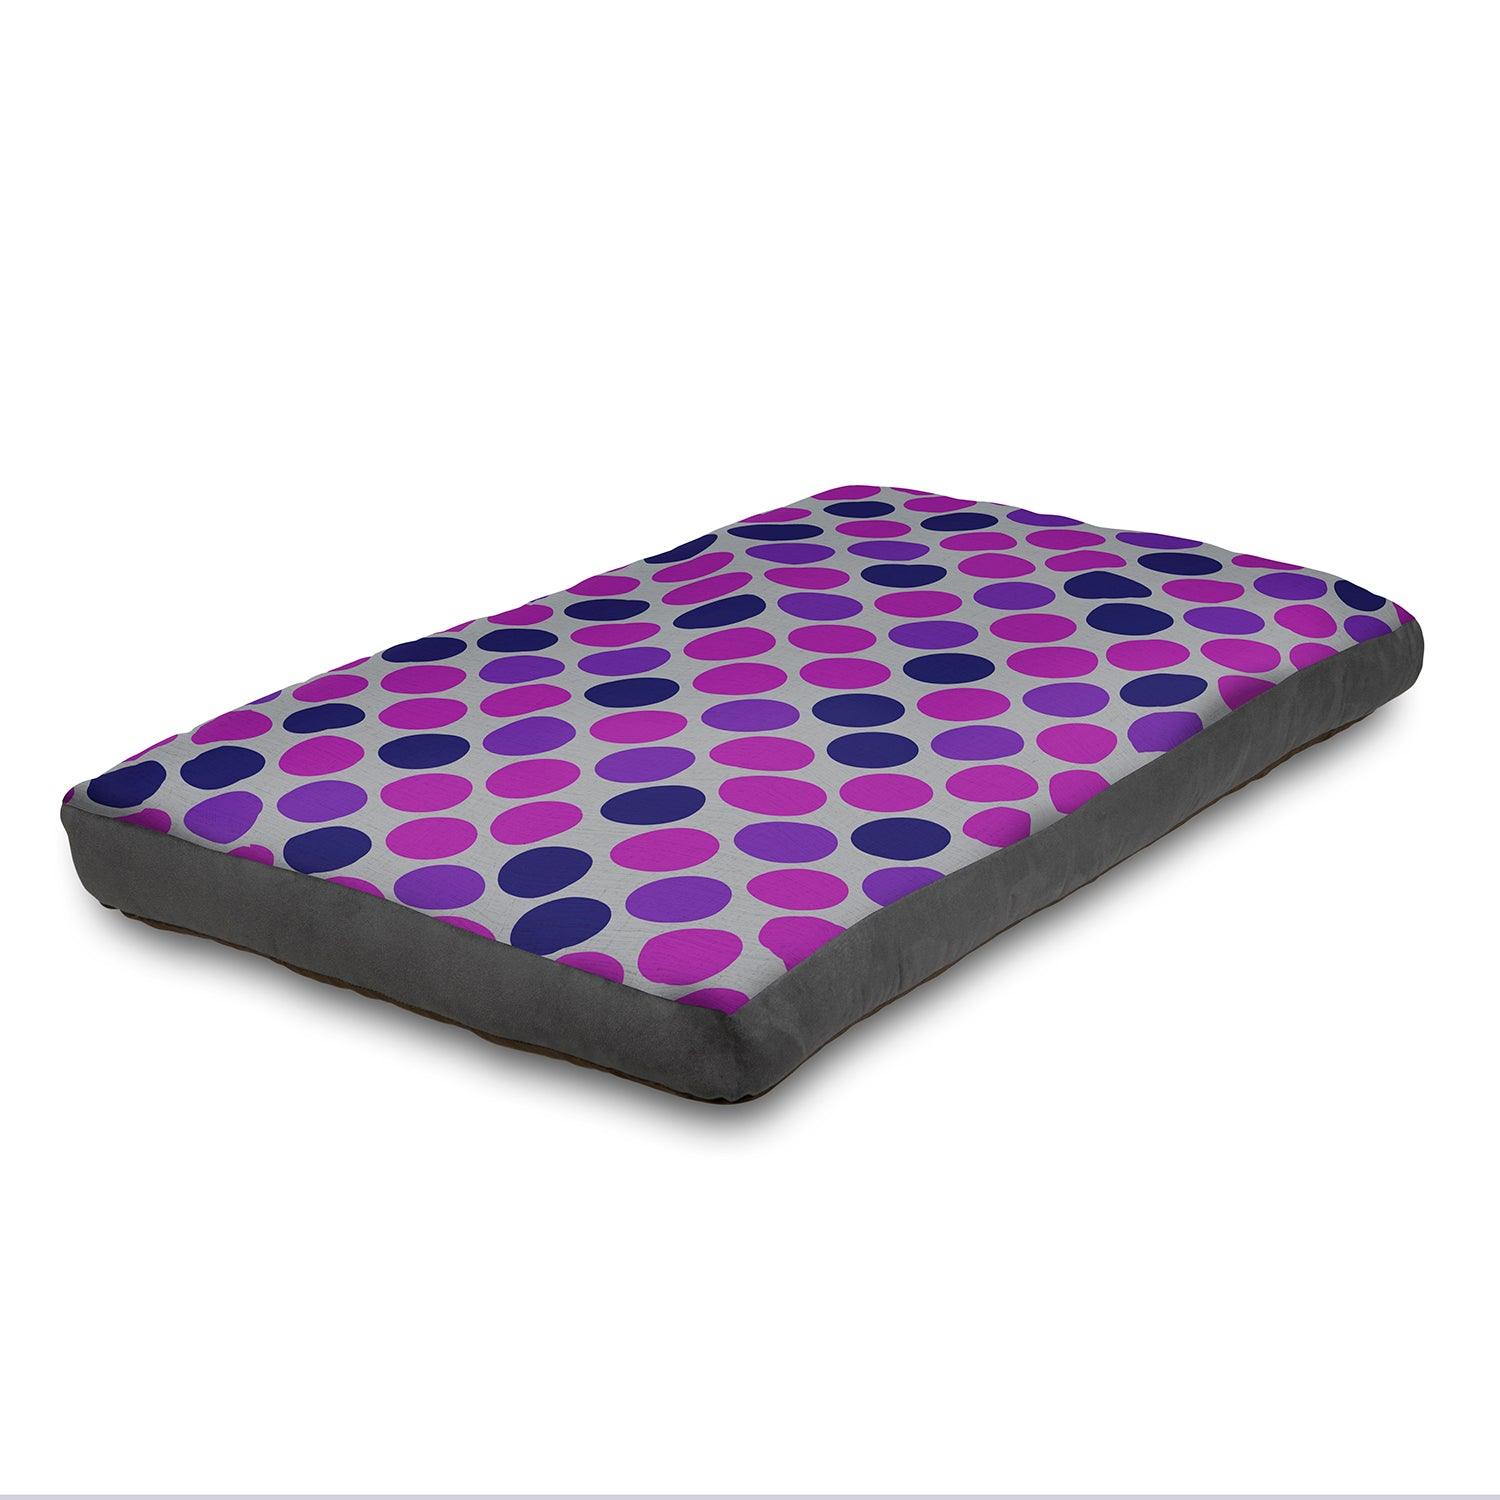 View Super Comfy Dog Bed Soft and Fluffy with Washable Cover XLarge 150 cm x 100 cm Circles information